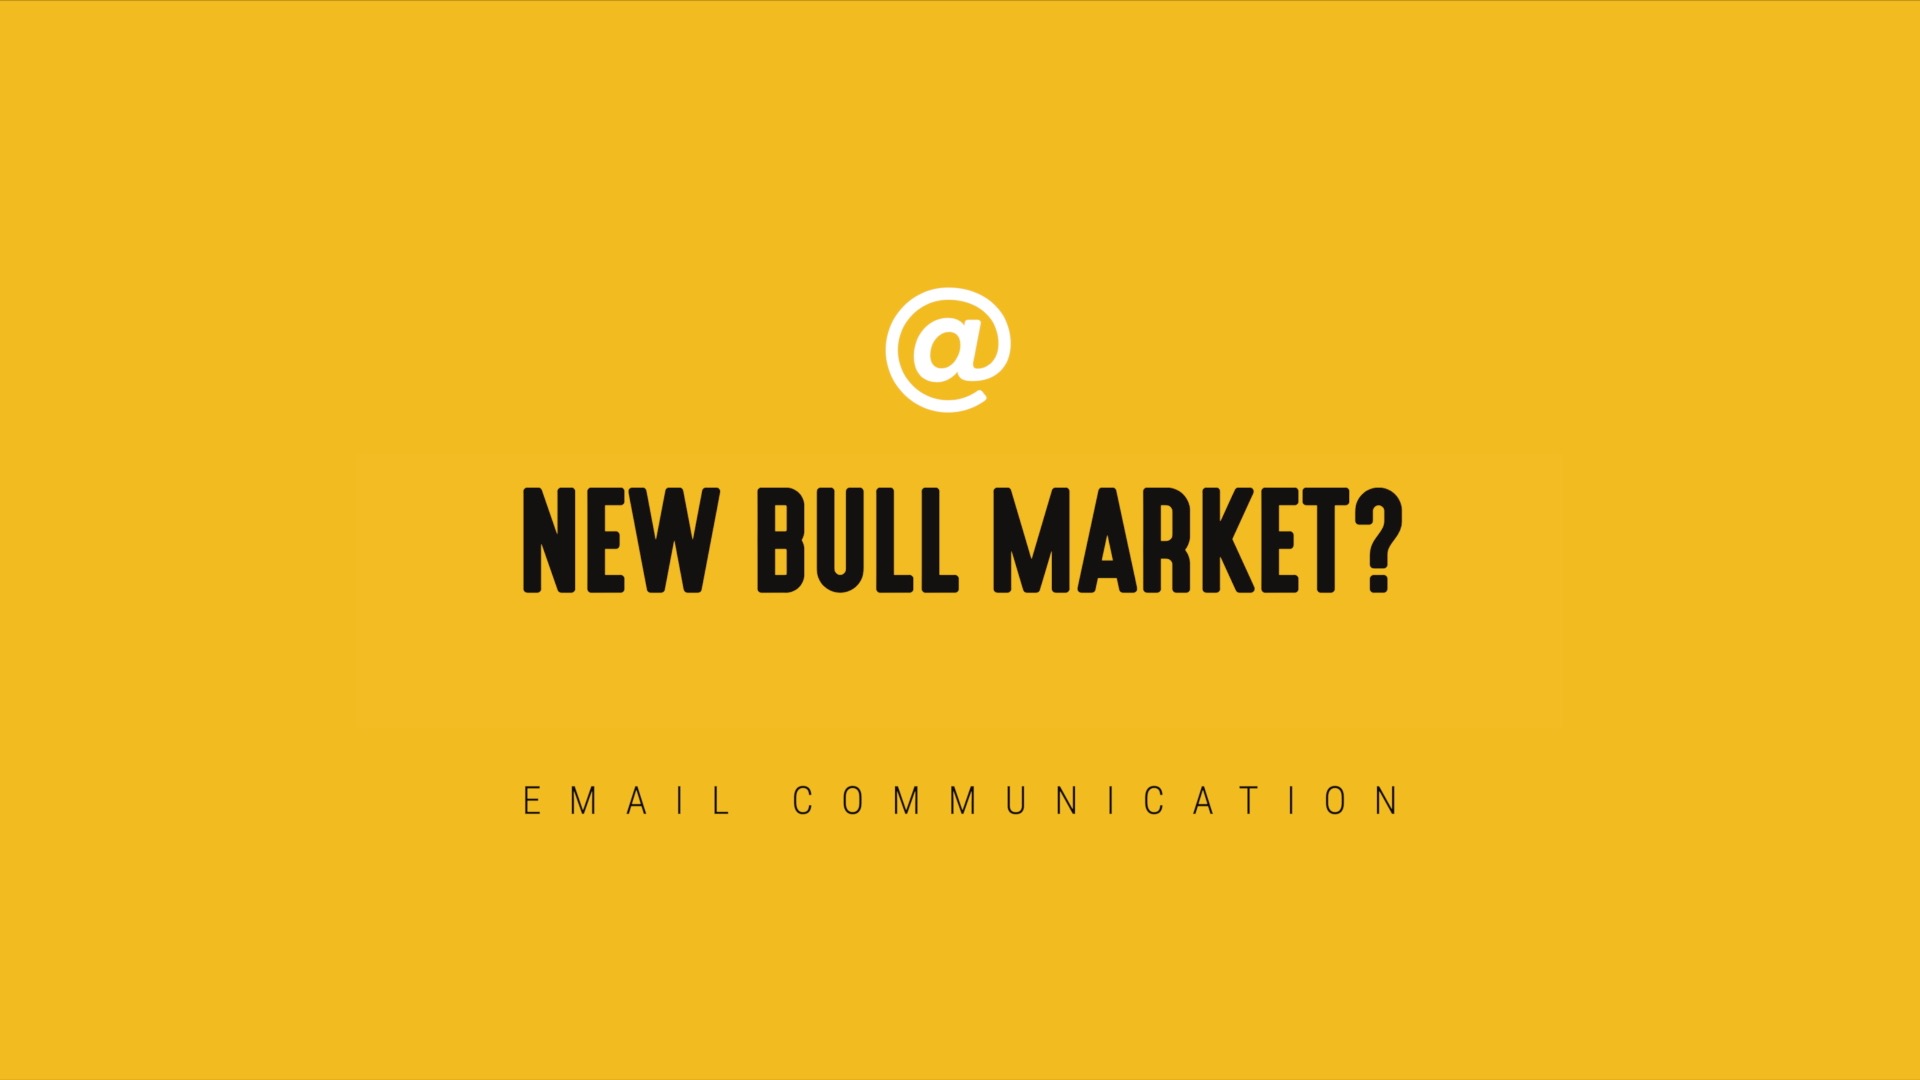 [NEW] New Bull Market? - Timely Email